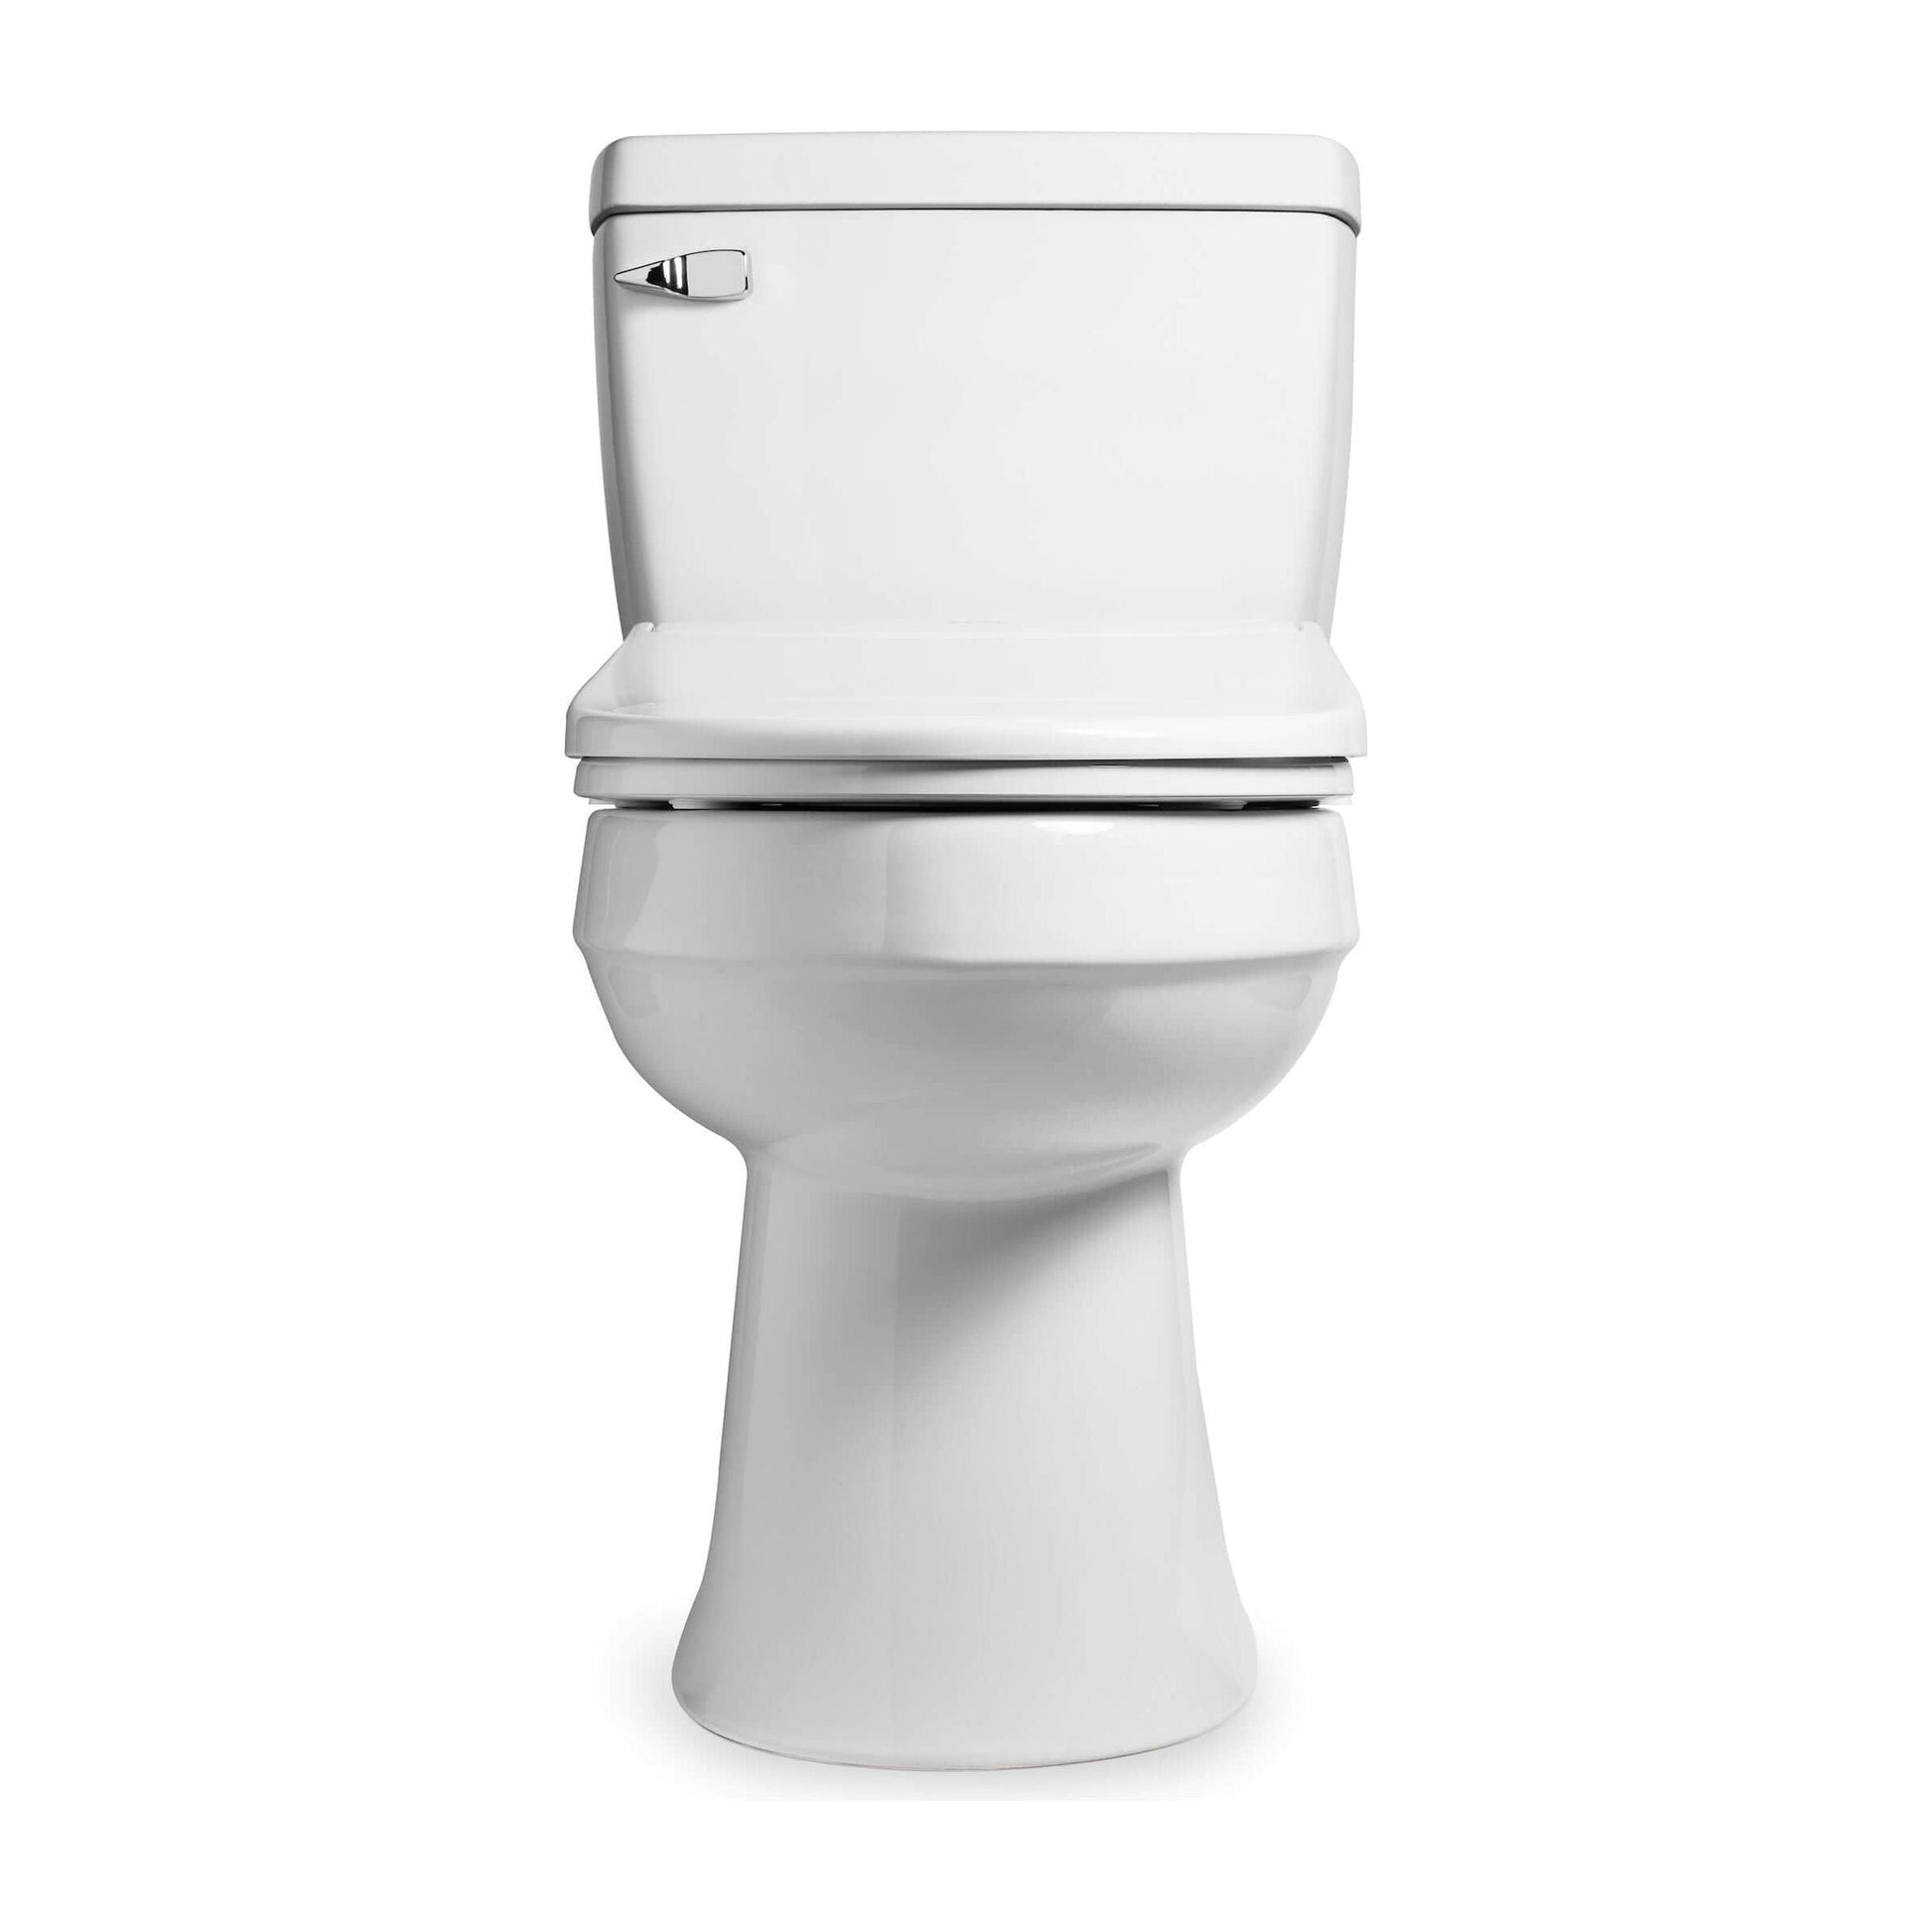 Swash Eco Thinline T66 Bidet Seat - front view attached to a toilet